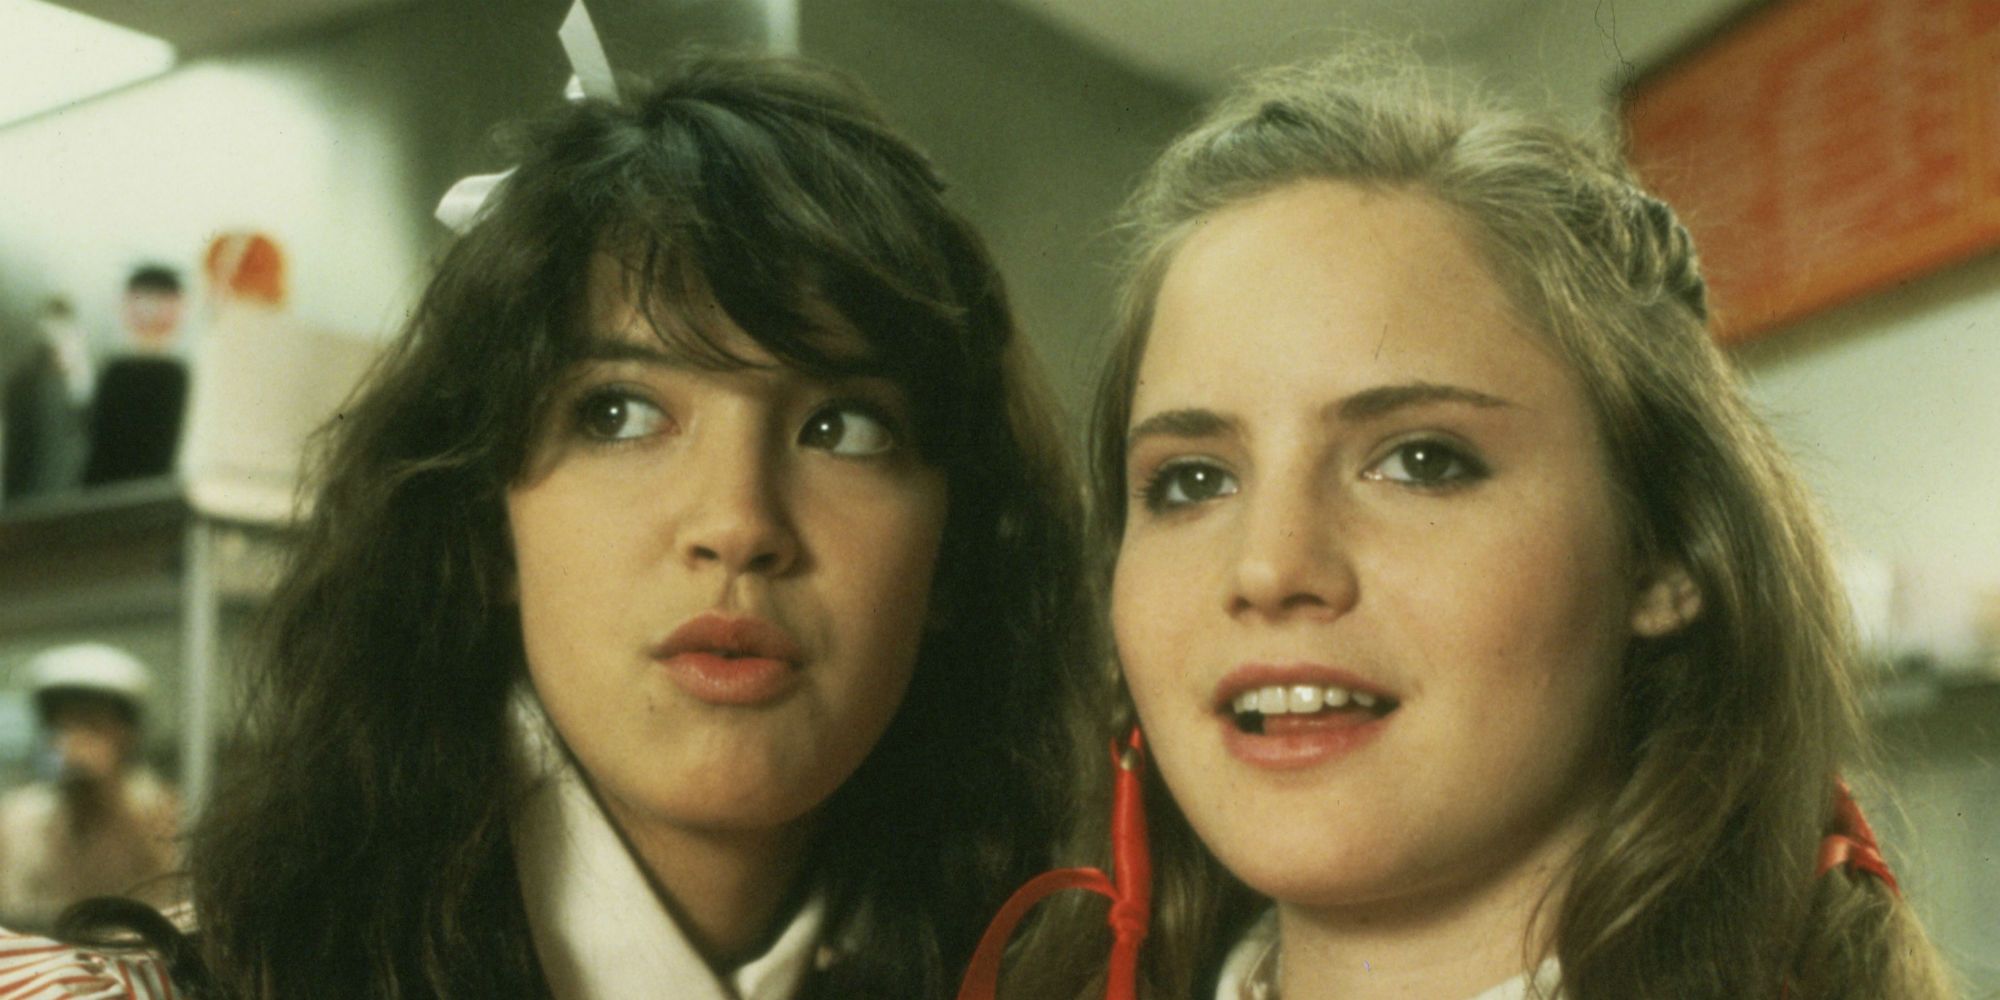 Phoebe Cates and Jennifer Jason Leigh in Fast Times At Ridgemont High